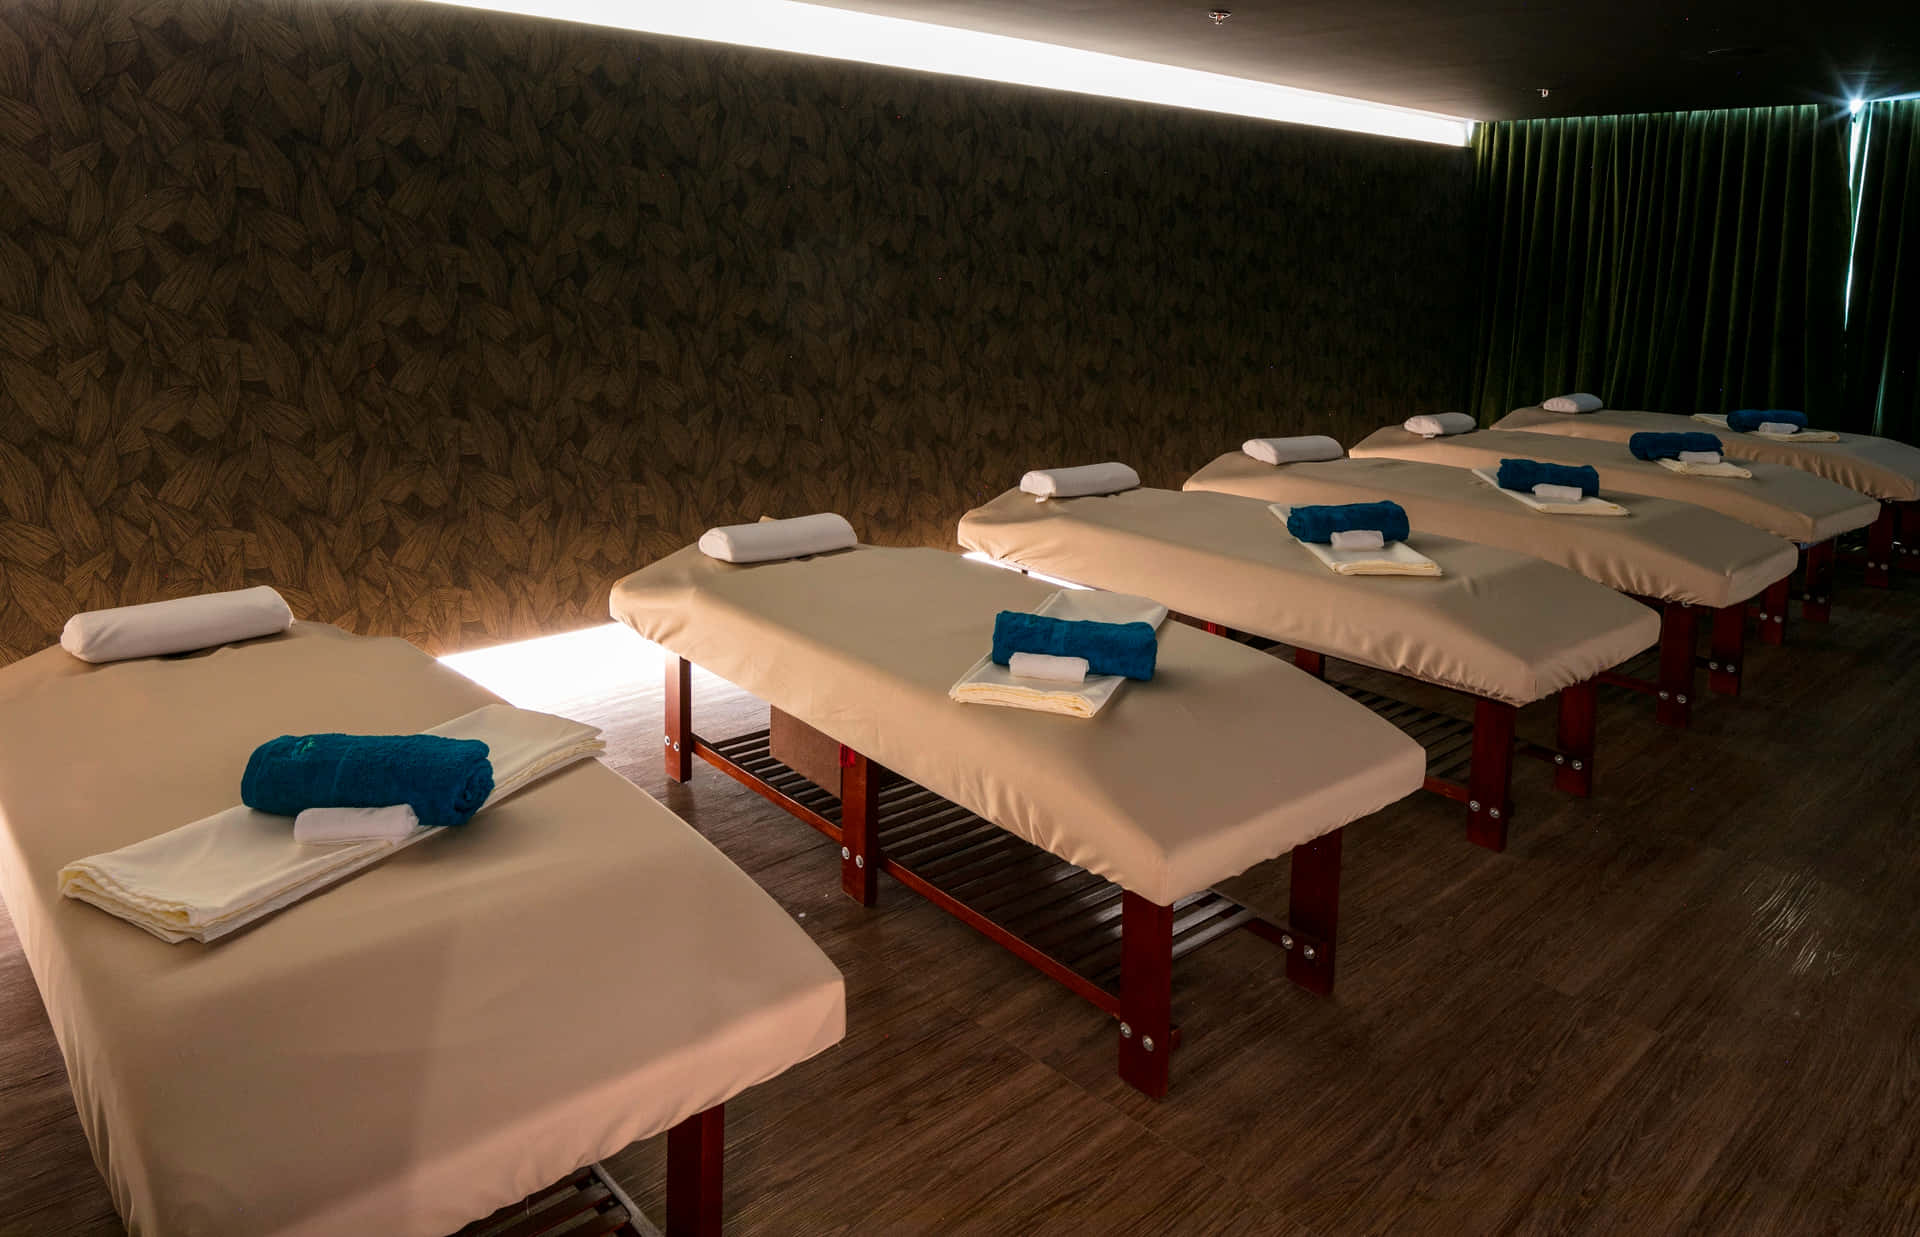 A Row Of Massage Beds Lined Up